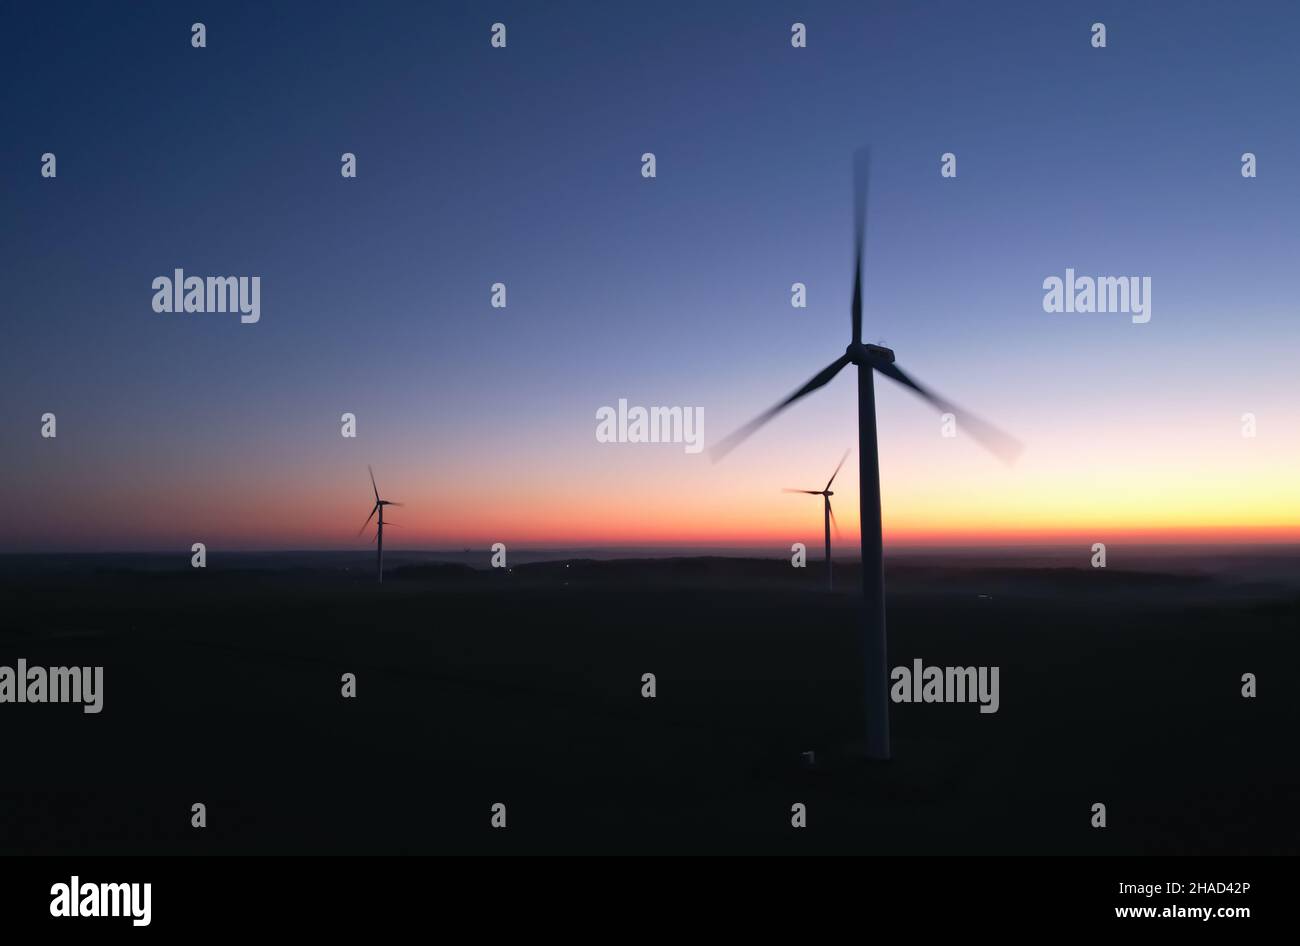 Three silhouettes of rotating propellers of wind turbines against the background of the night sky. Stock Photo